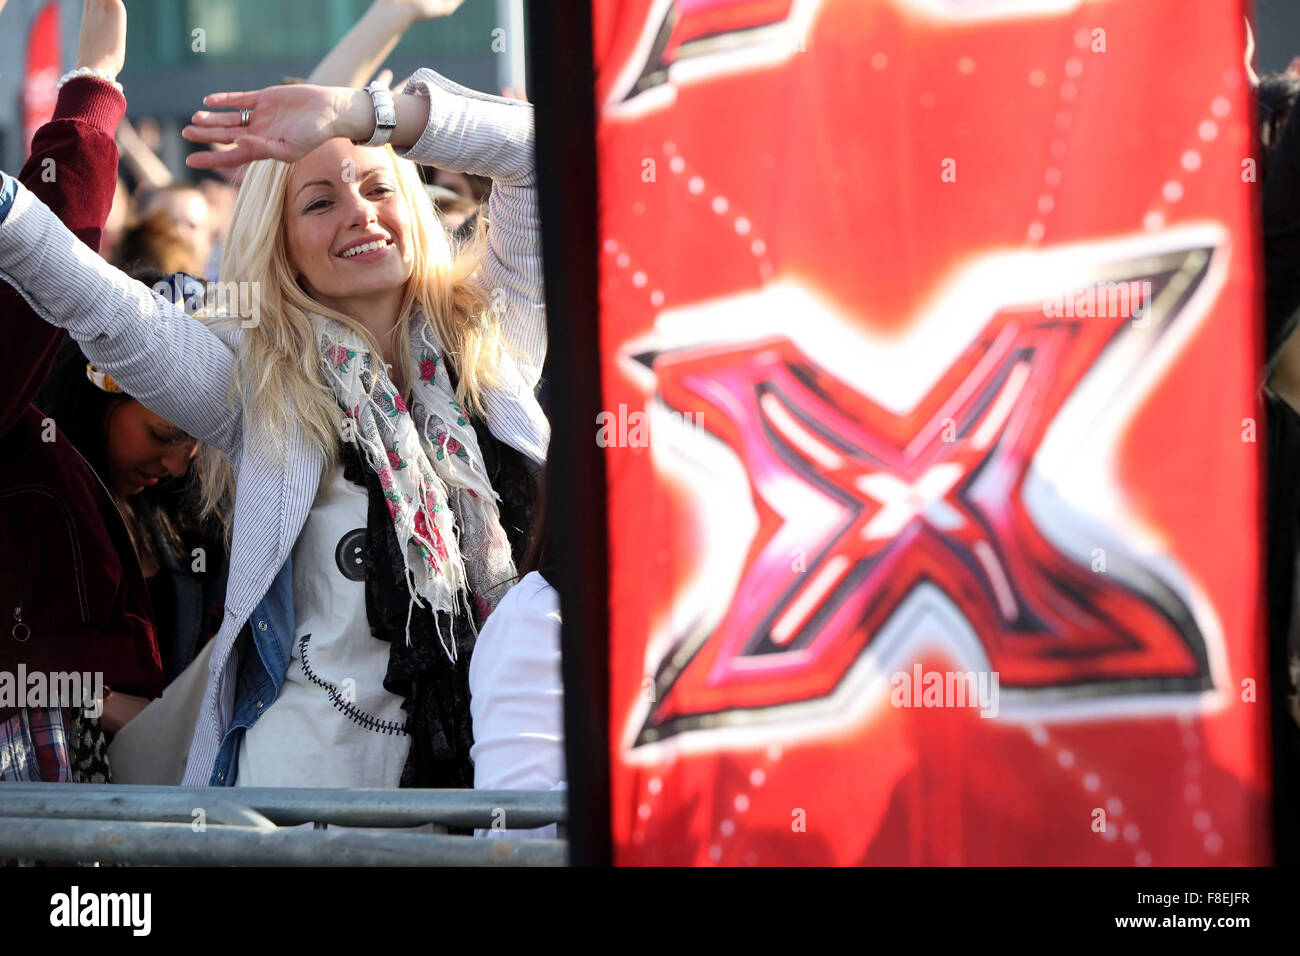 X-Factor auditions a Old Trafford Football Ground , Manchester . Foto Stock